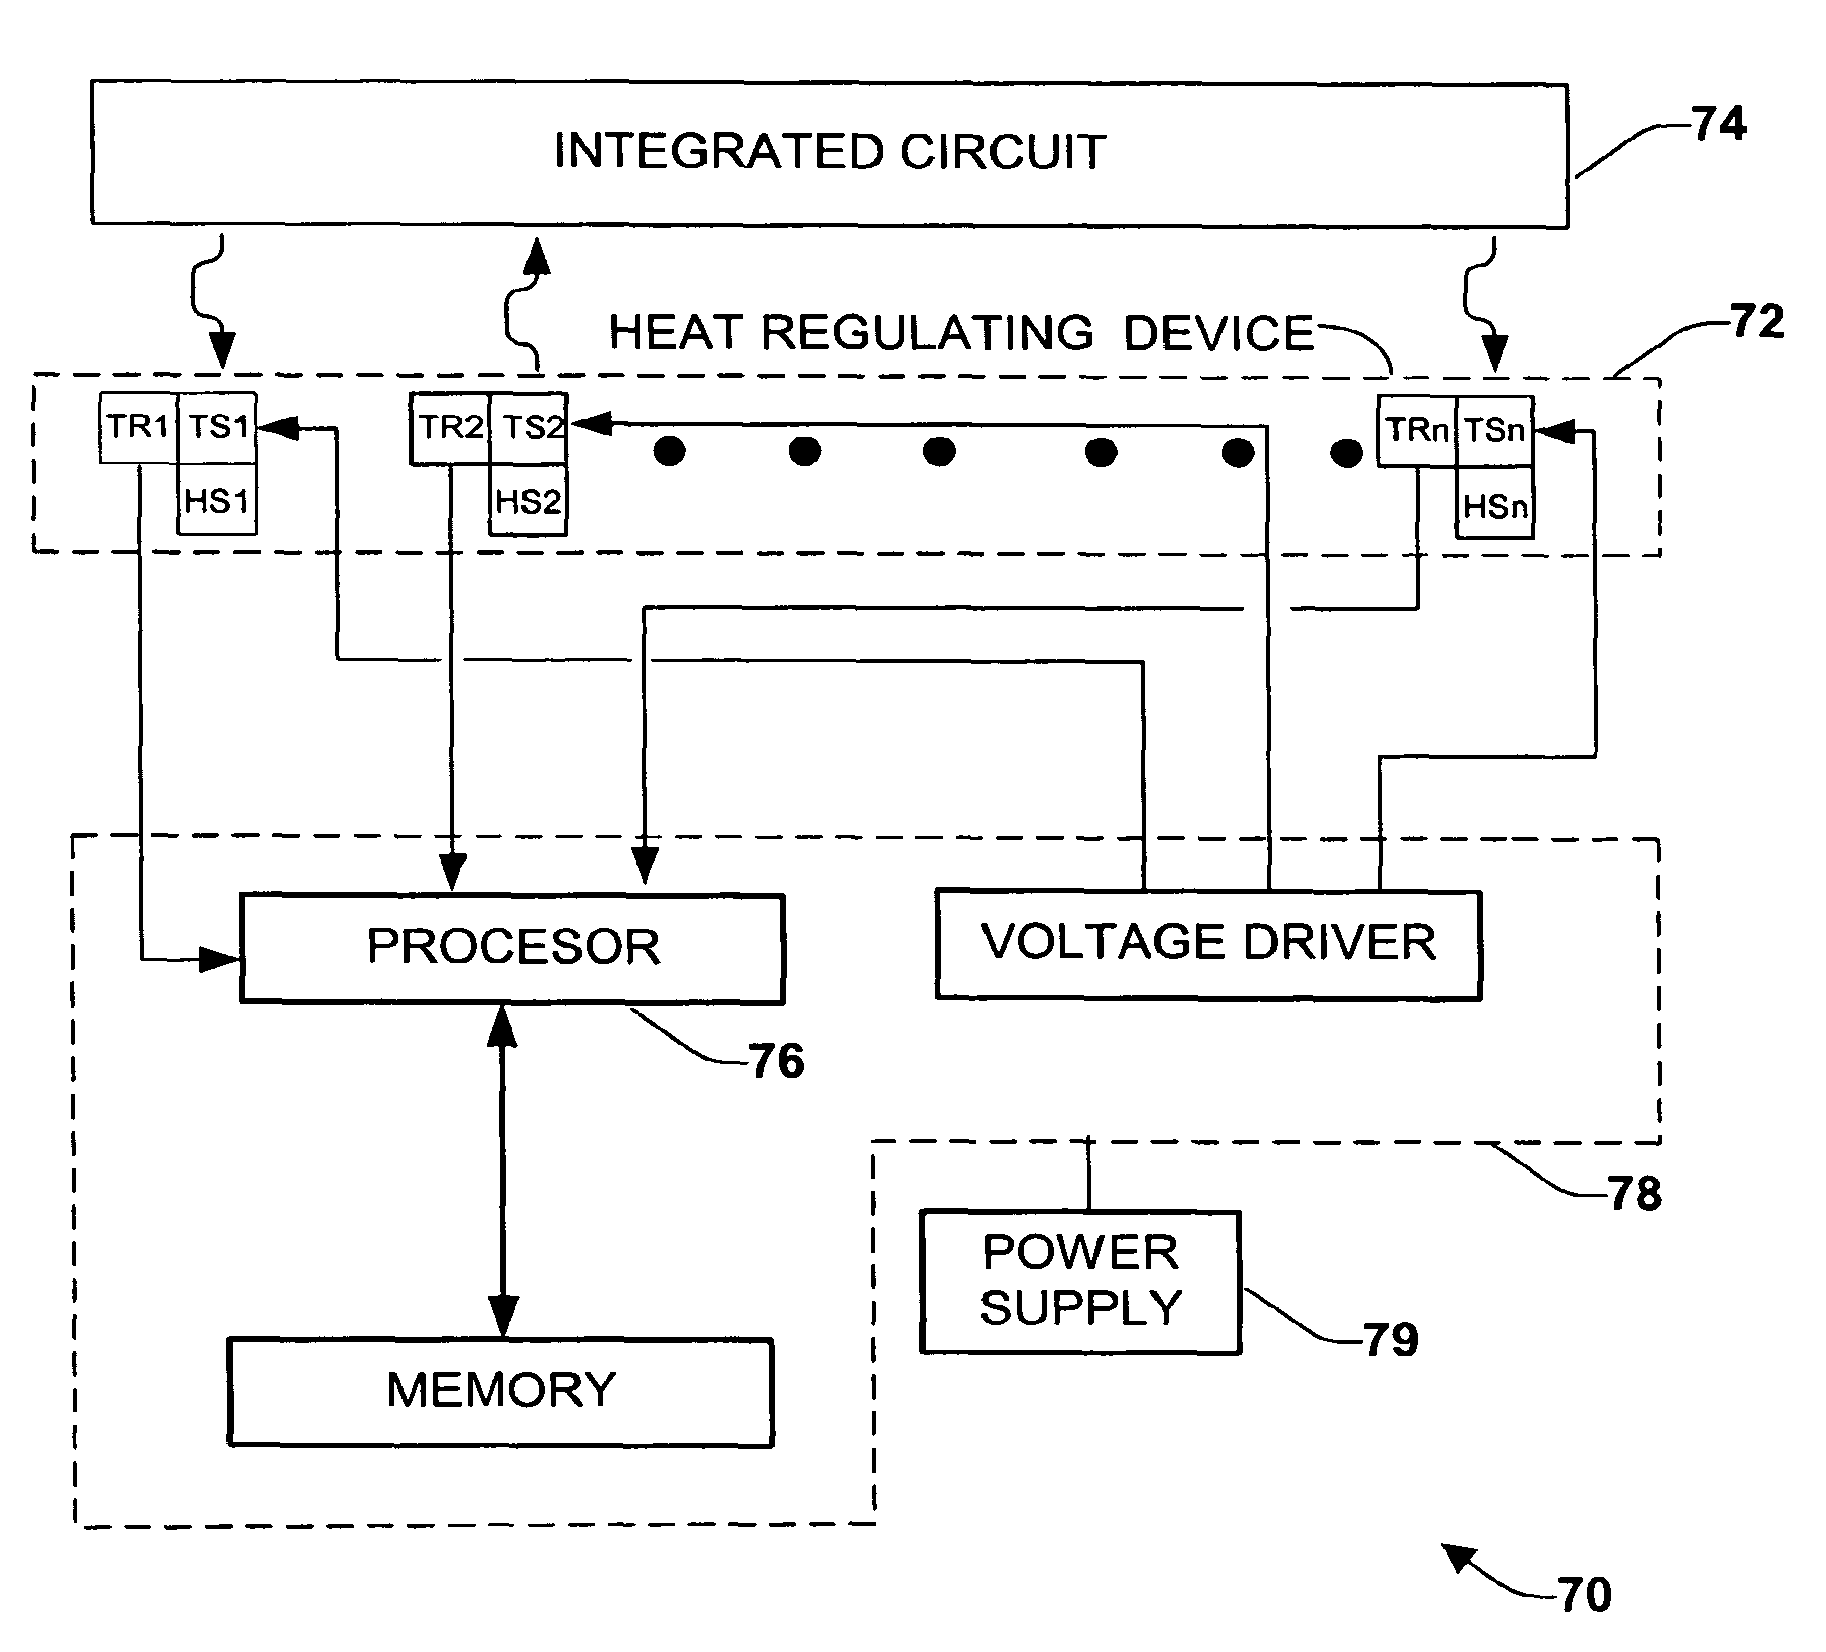 Mitigating heat in an integrated circuit